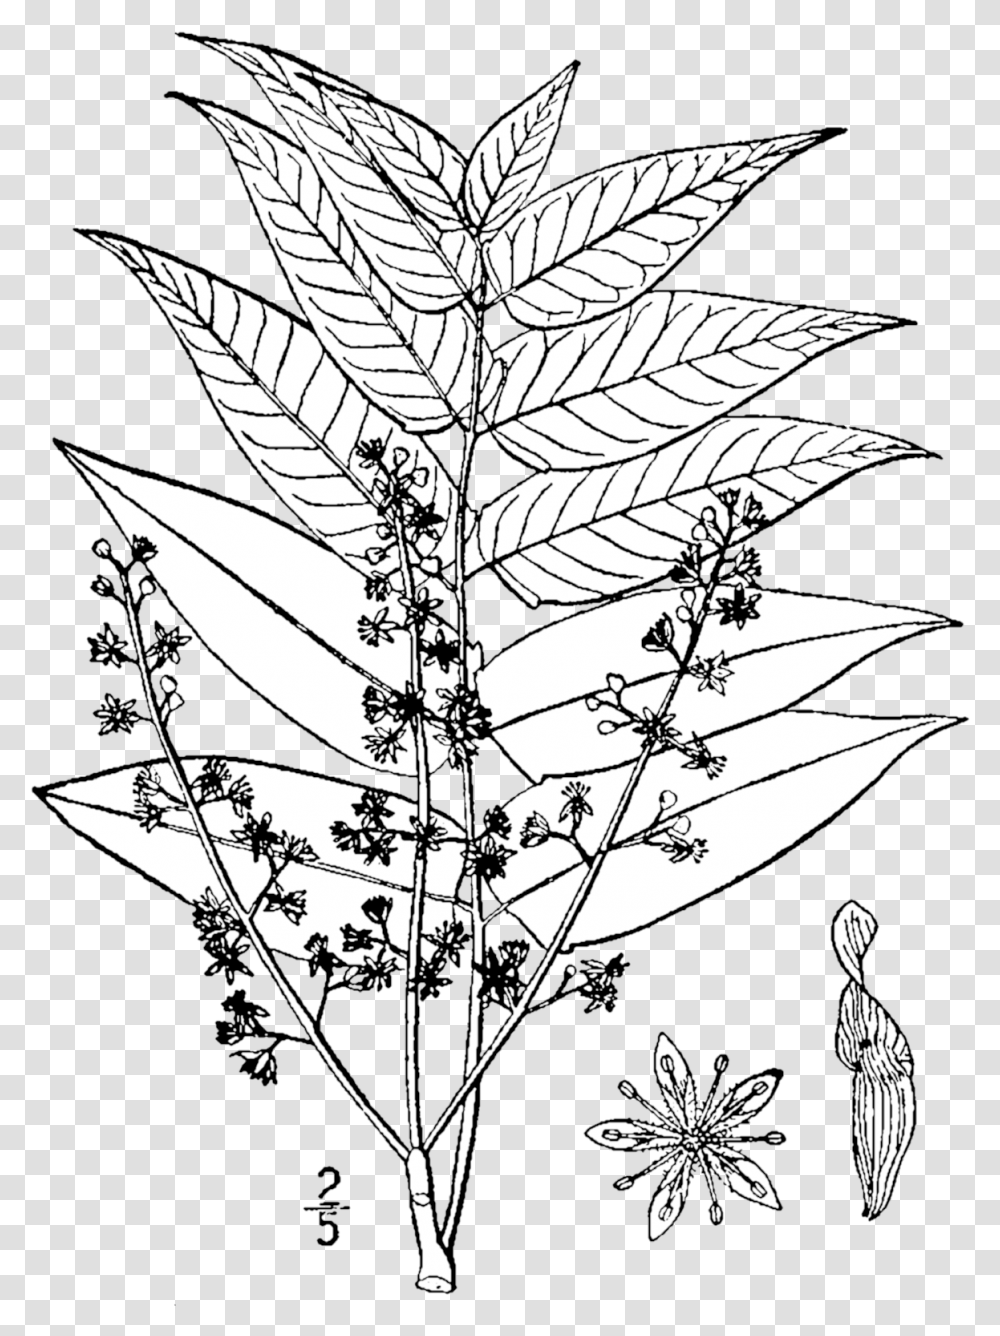 Fileailanthus Altissima Drawingpng Wikimedia Commons Ailanthus Altissima Hand Drawing, Leaf, Plant, Pattern, Ornament Transparent Png